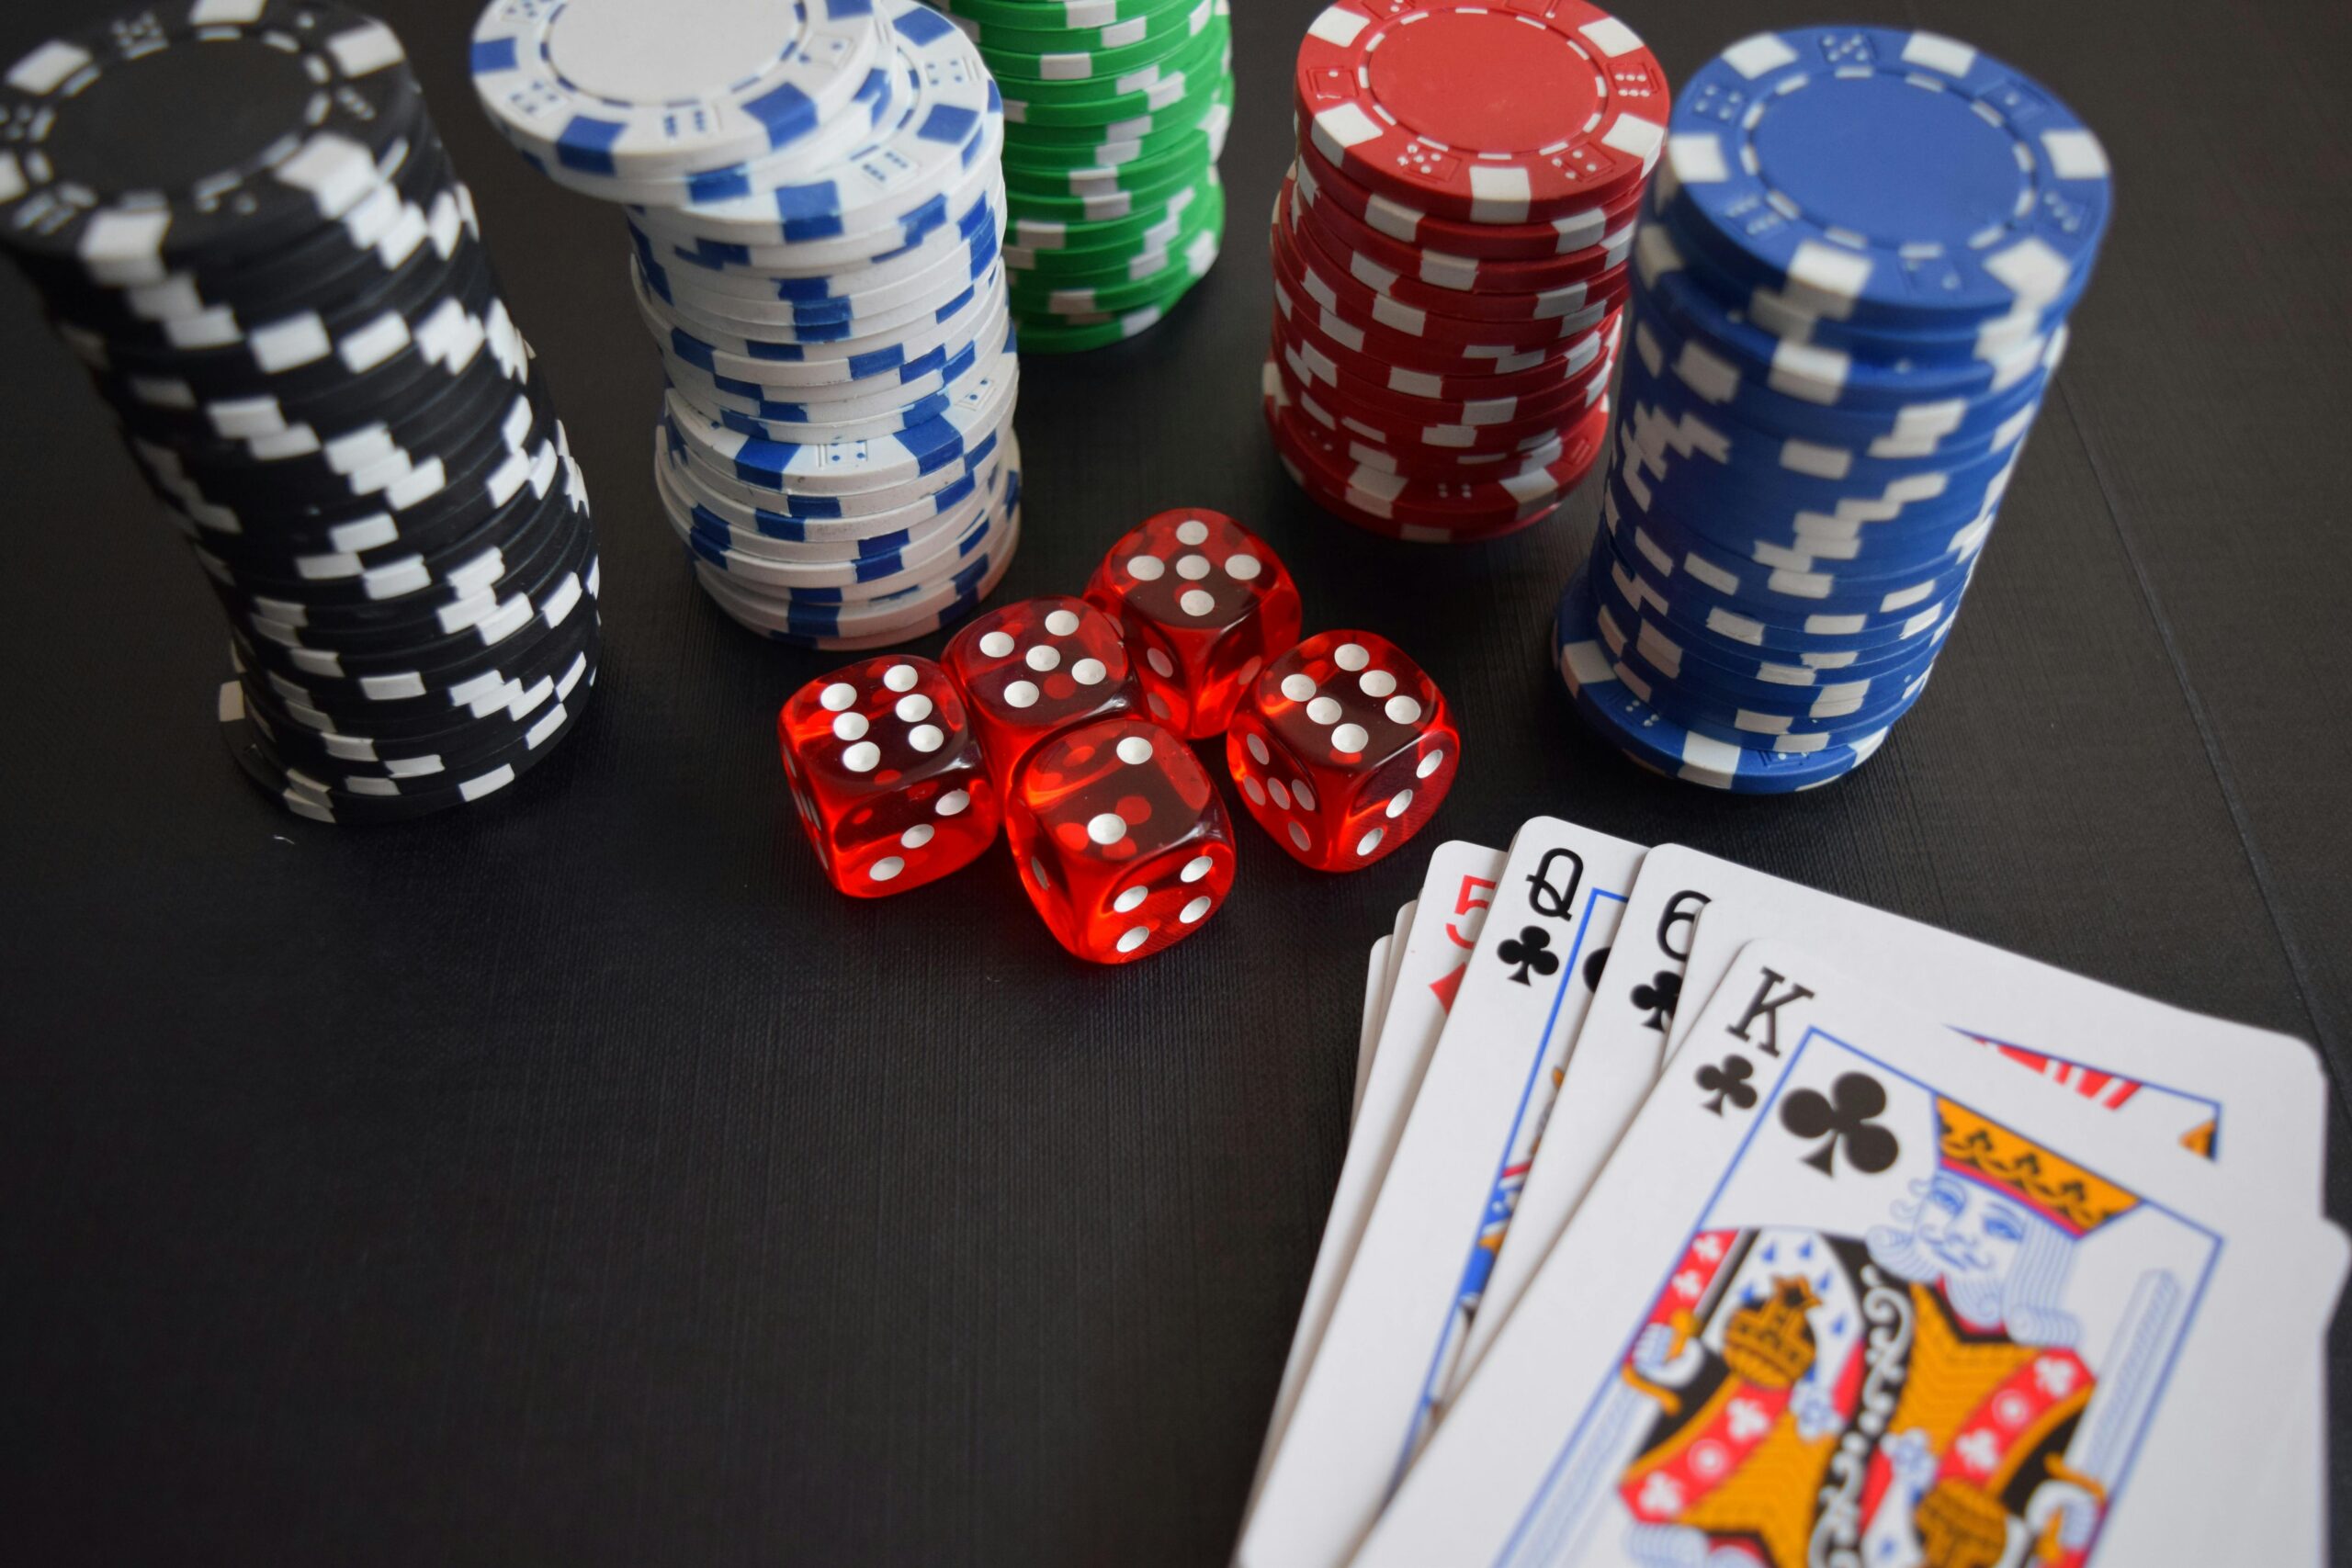 What to Look for When Playing at an Online Casino